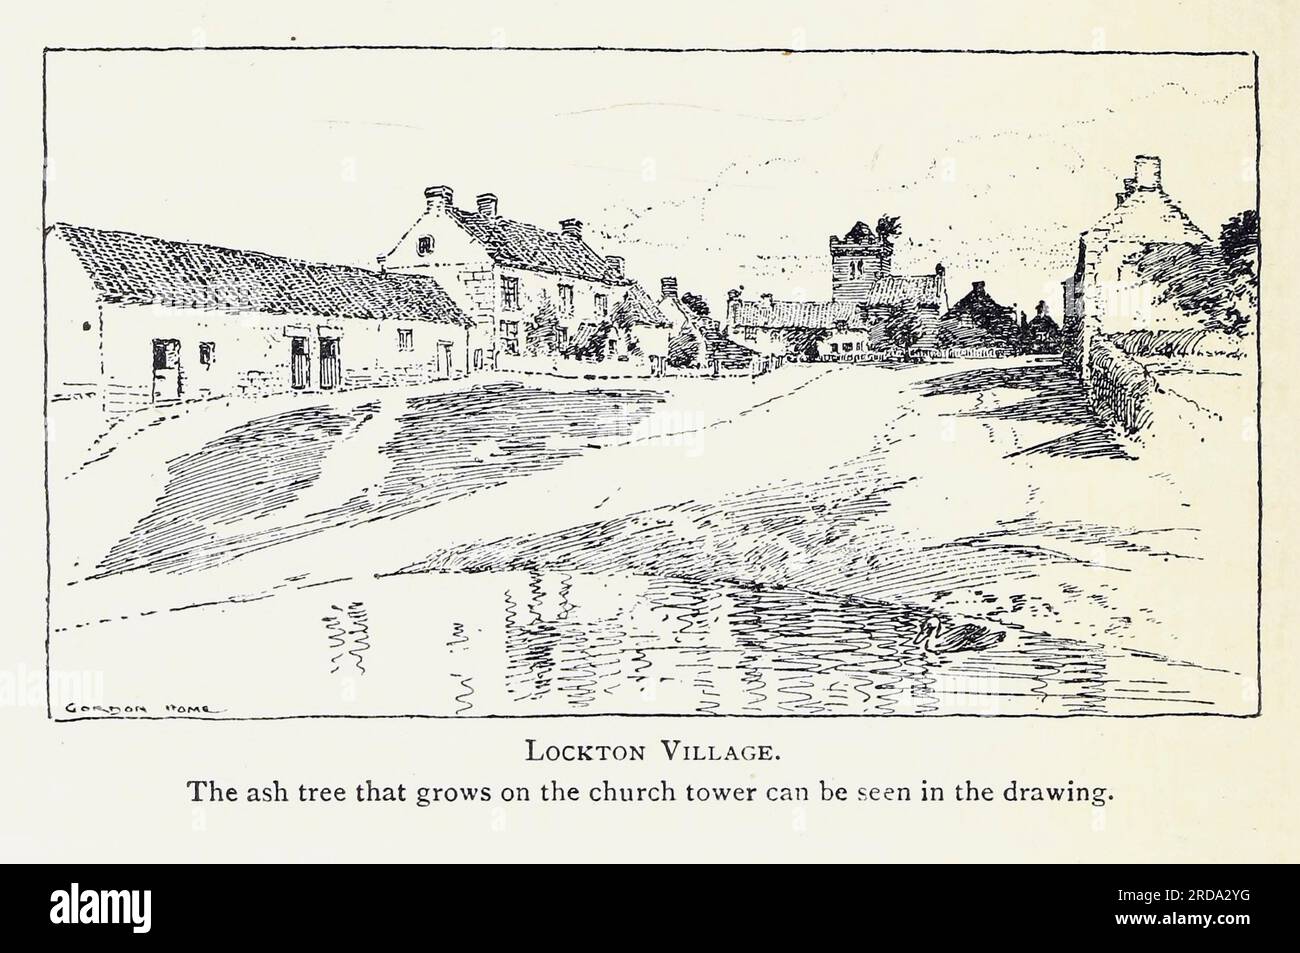 Lockton Village aus dem Buch " The Evolution of an English Town; being the Story of the Old town of Pickering in Yorkshire, from prähistorische Times to the Year of Our Lord Nineteen hundert & 5 " von Gordon Home, Publisher London, J.M. Dent & co.; New York, E.P. Dutton & co. 1905 Stockfoto